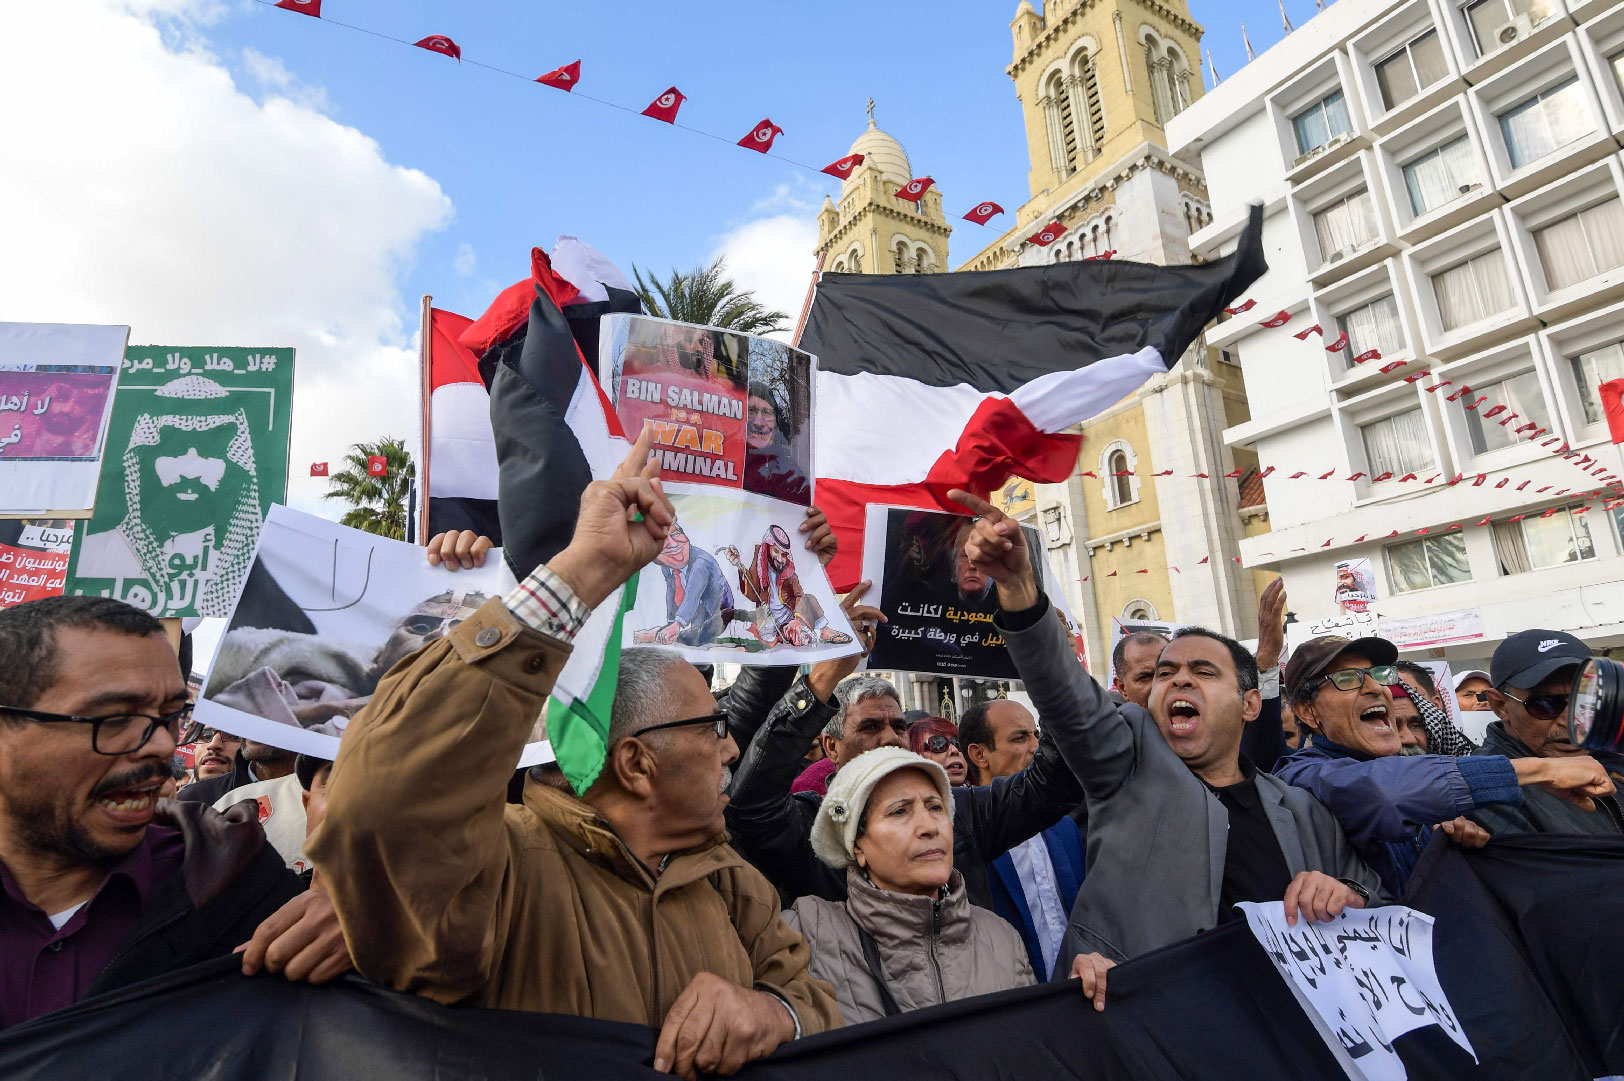 Tunisians shout slogans and hold up signs as they protest against the expected visit of the Saudi Crown Prince.